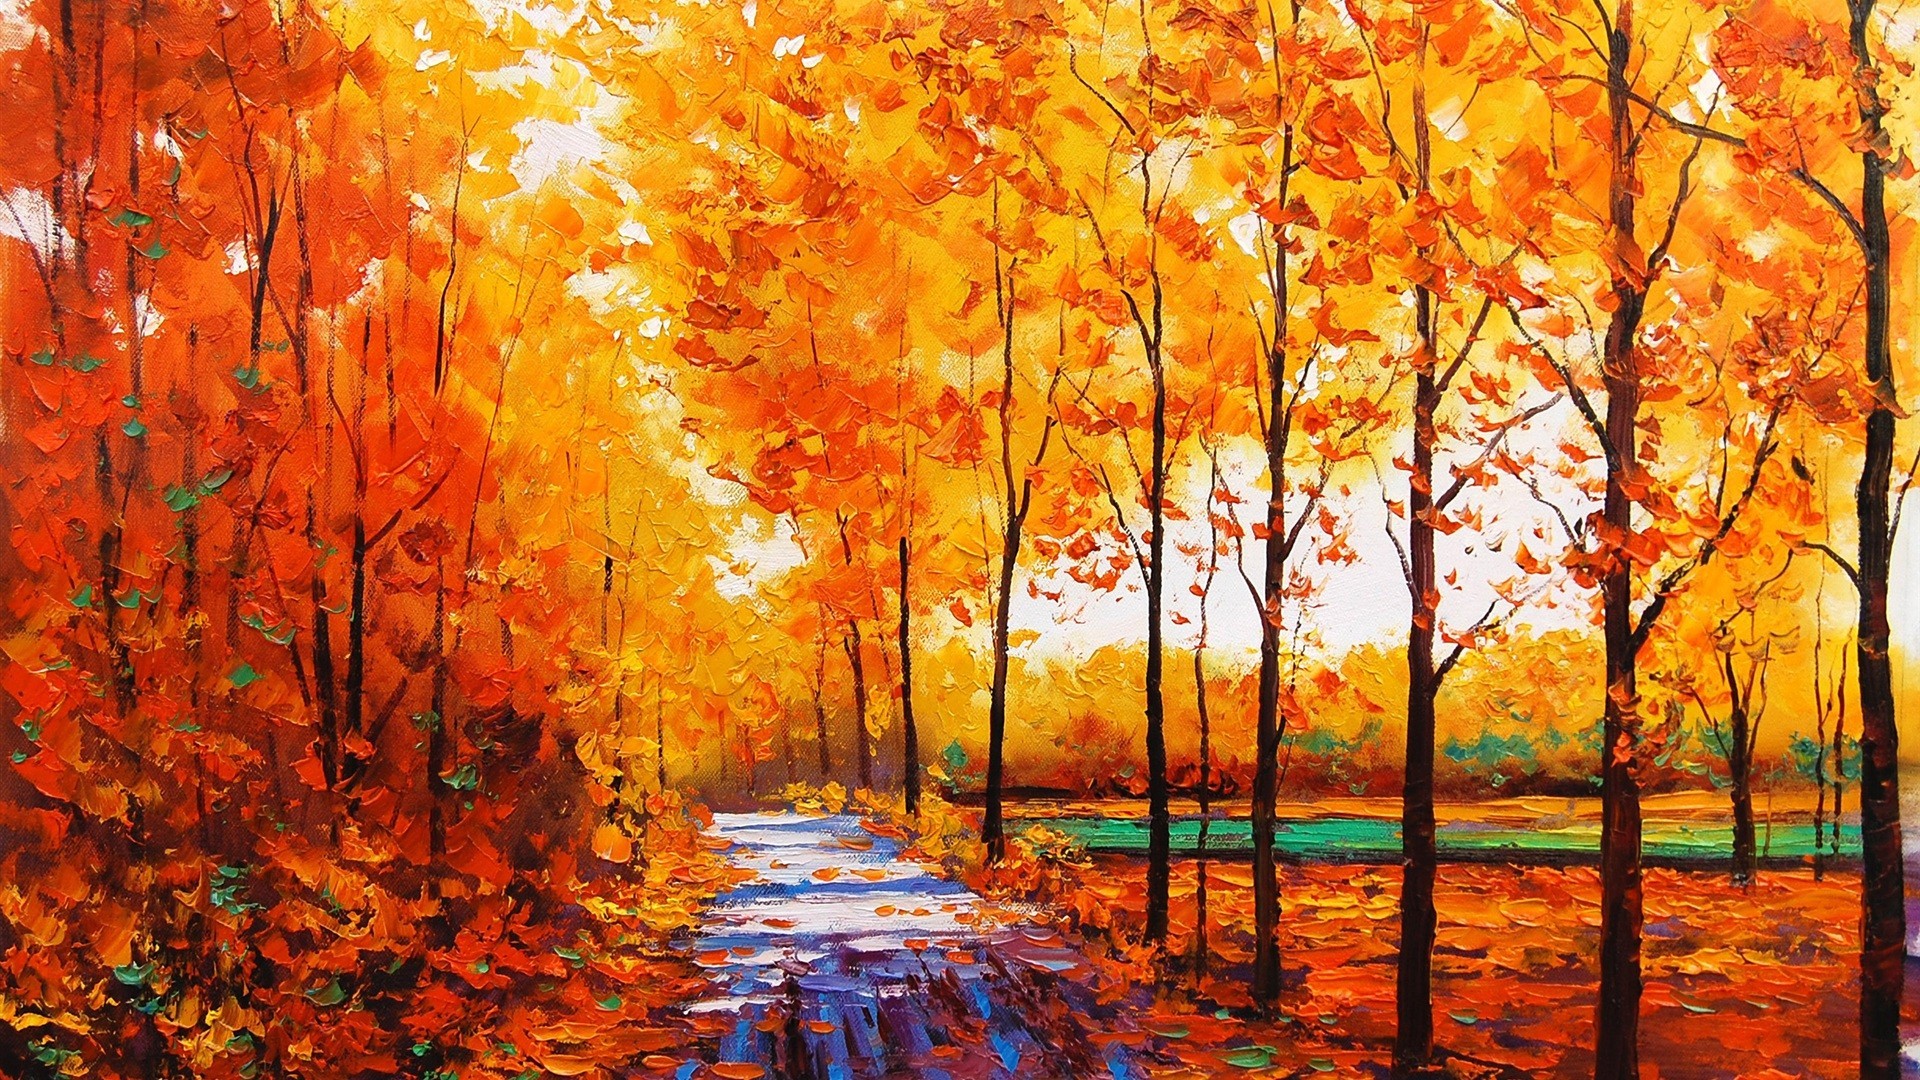 Wallpaper, sunlight, trees, landscape, fall, reflection, branch, stream, oil painting, ART, autumn, 1920x1080 px, woodland, grove, computer wallpaper, modern art, temperate broadleaf and mixed forest, deciduous, acrylic paint, watercolor paint